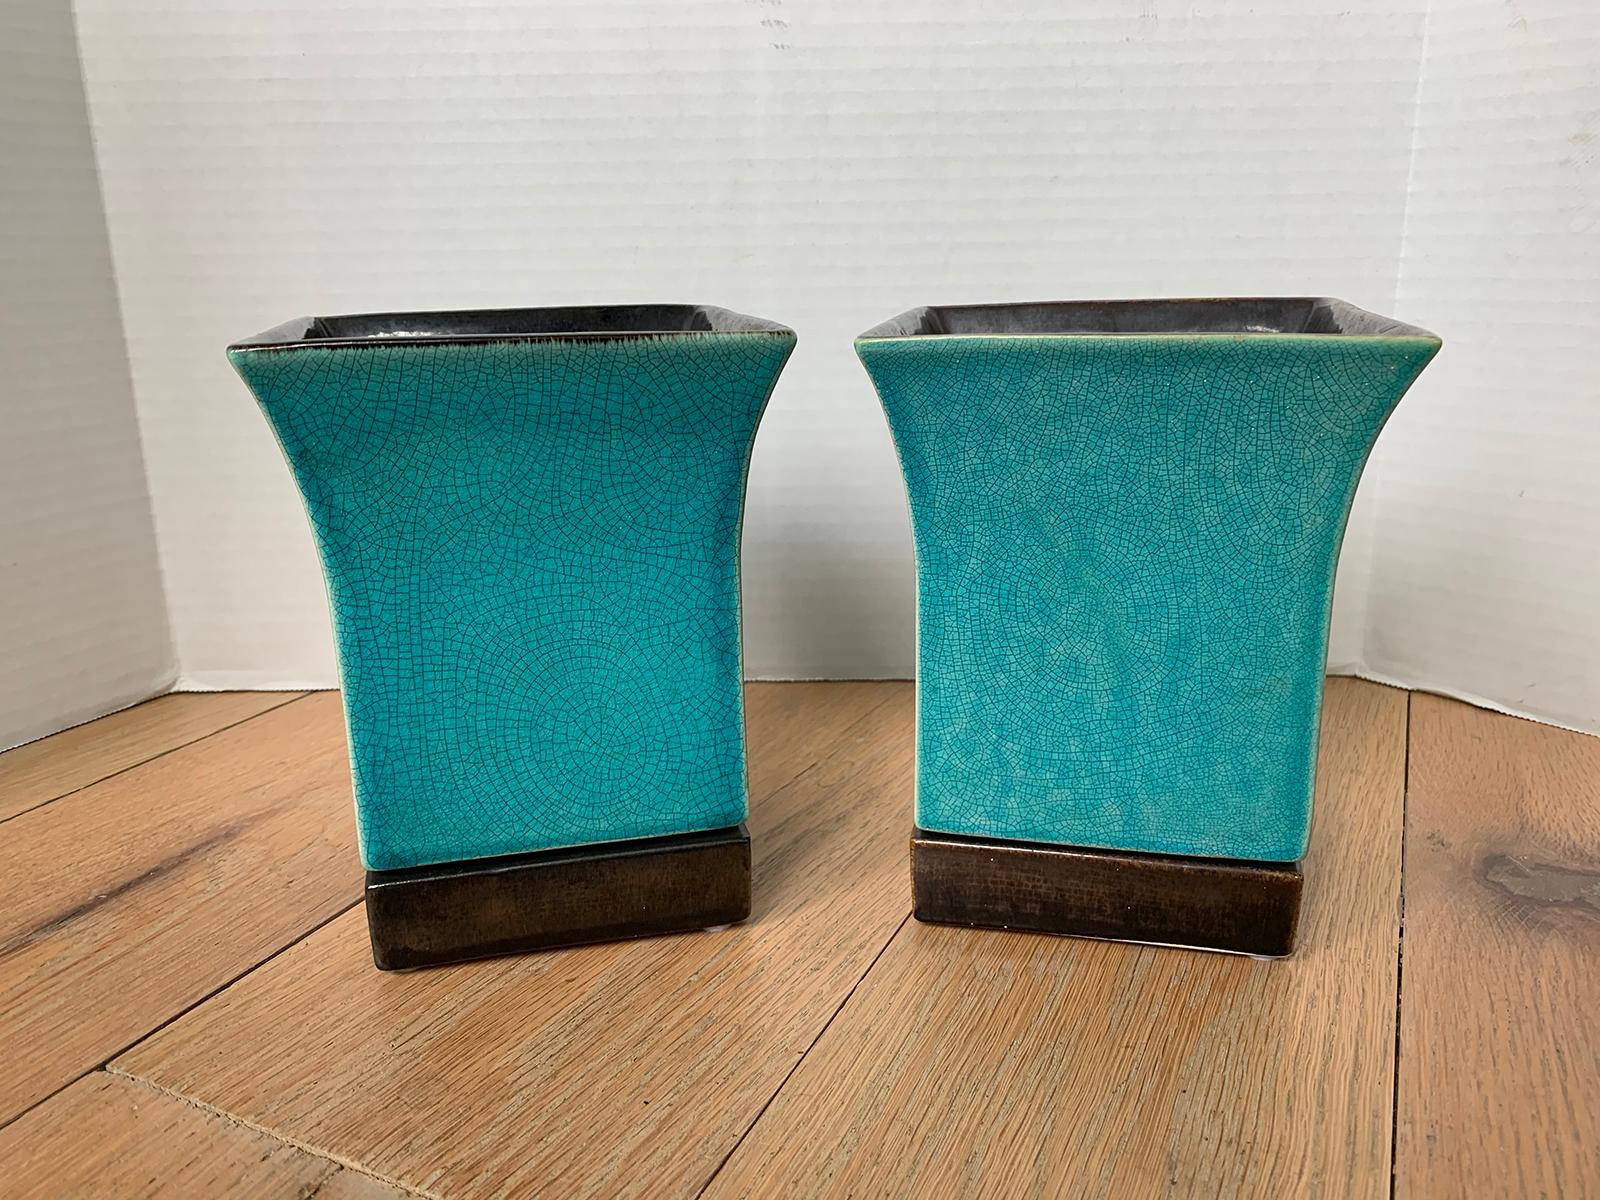 Pair of late 19th-early 20th century American turquoise blue square glazed pottery vases by Red wing pottery, marked.